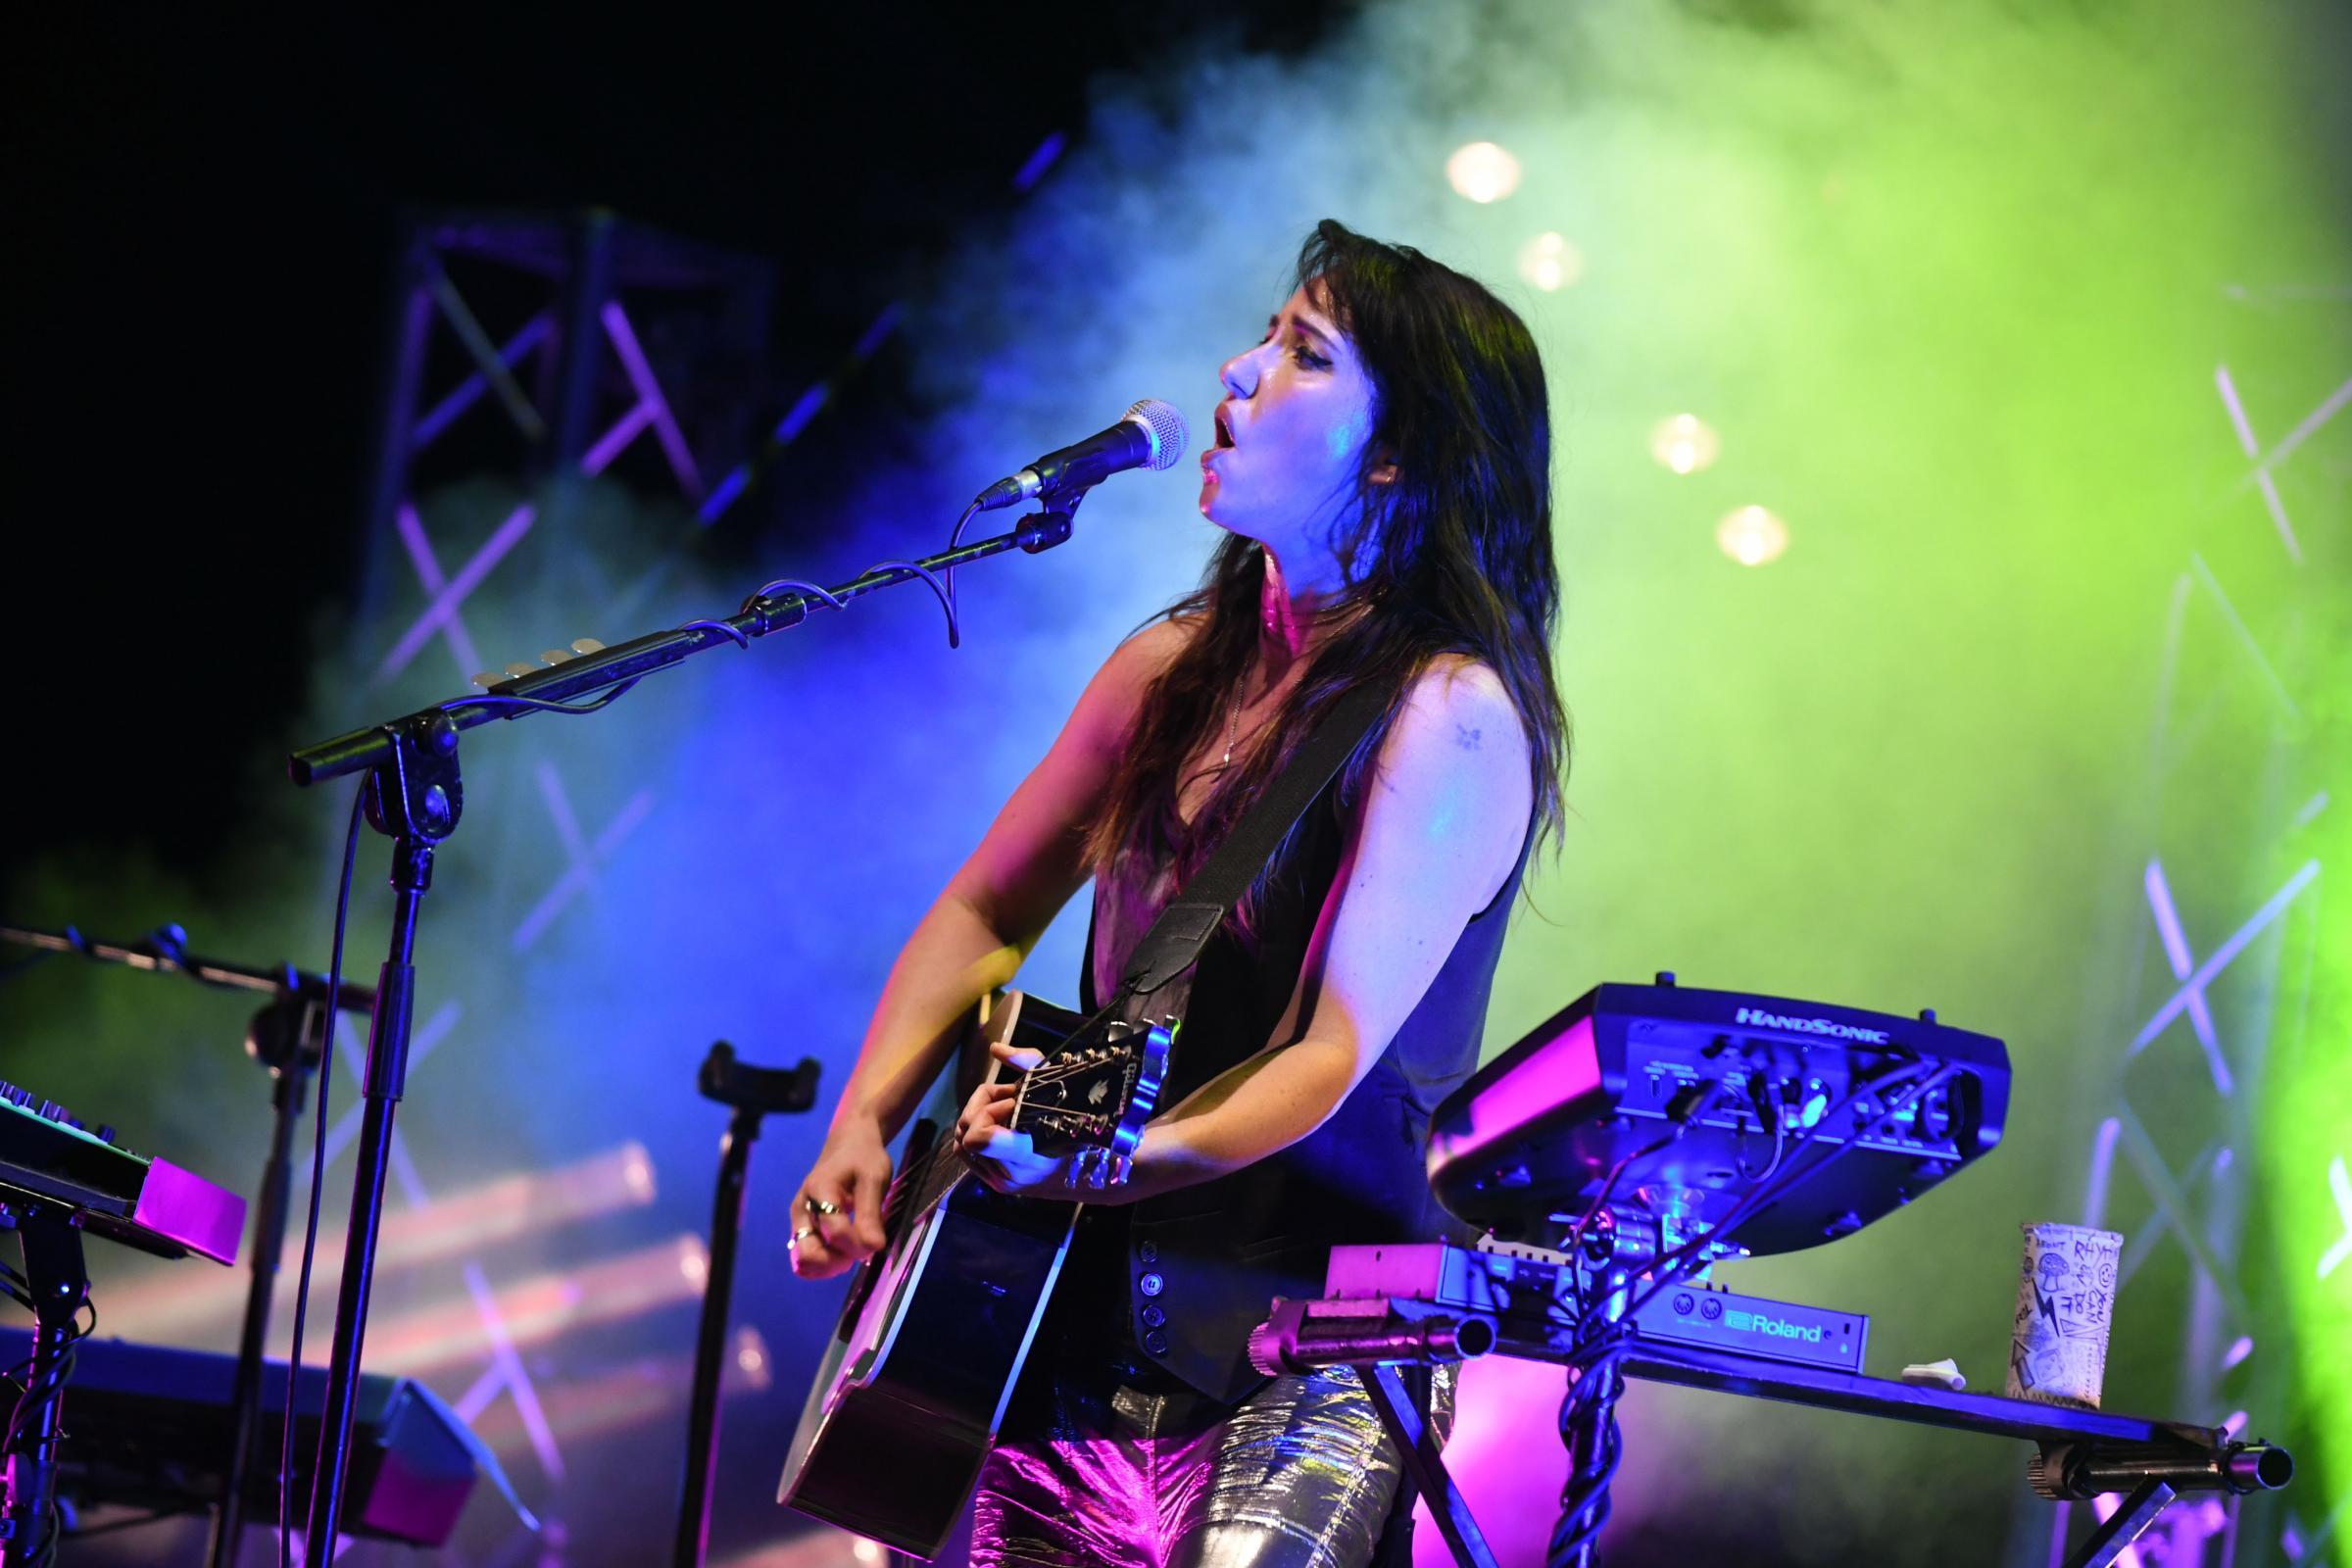 Scottish star KT Tunstall wows crowds at Parr Hall